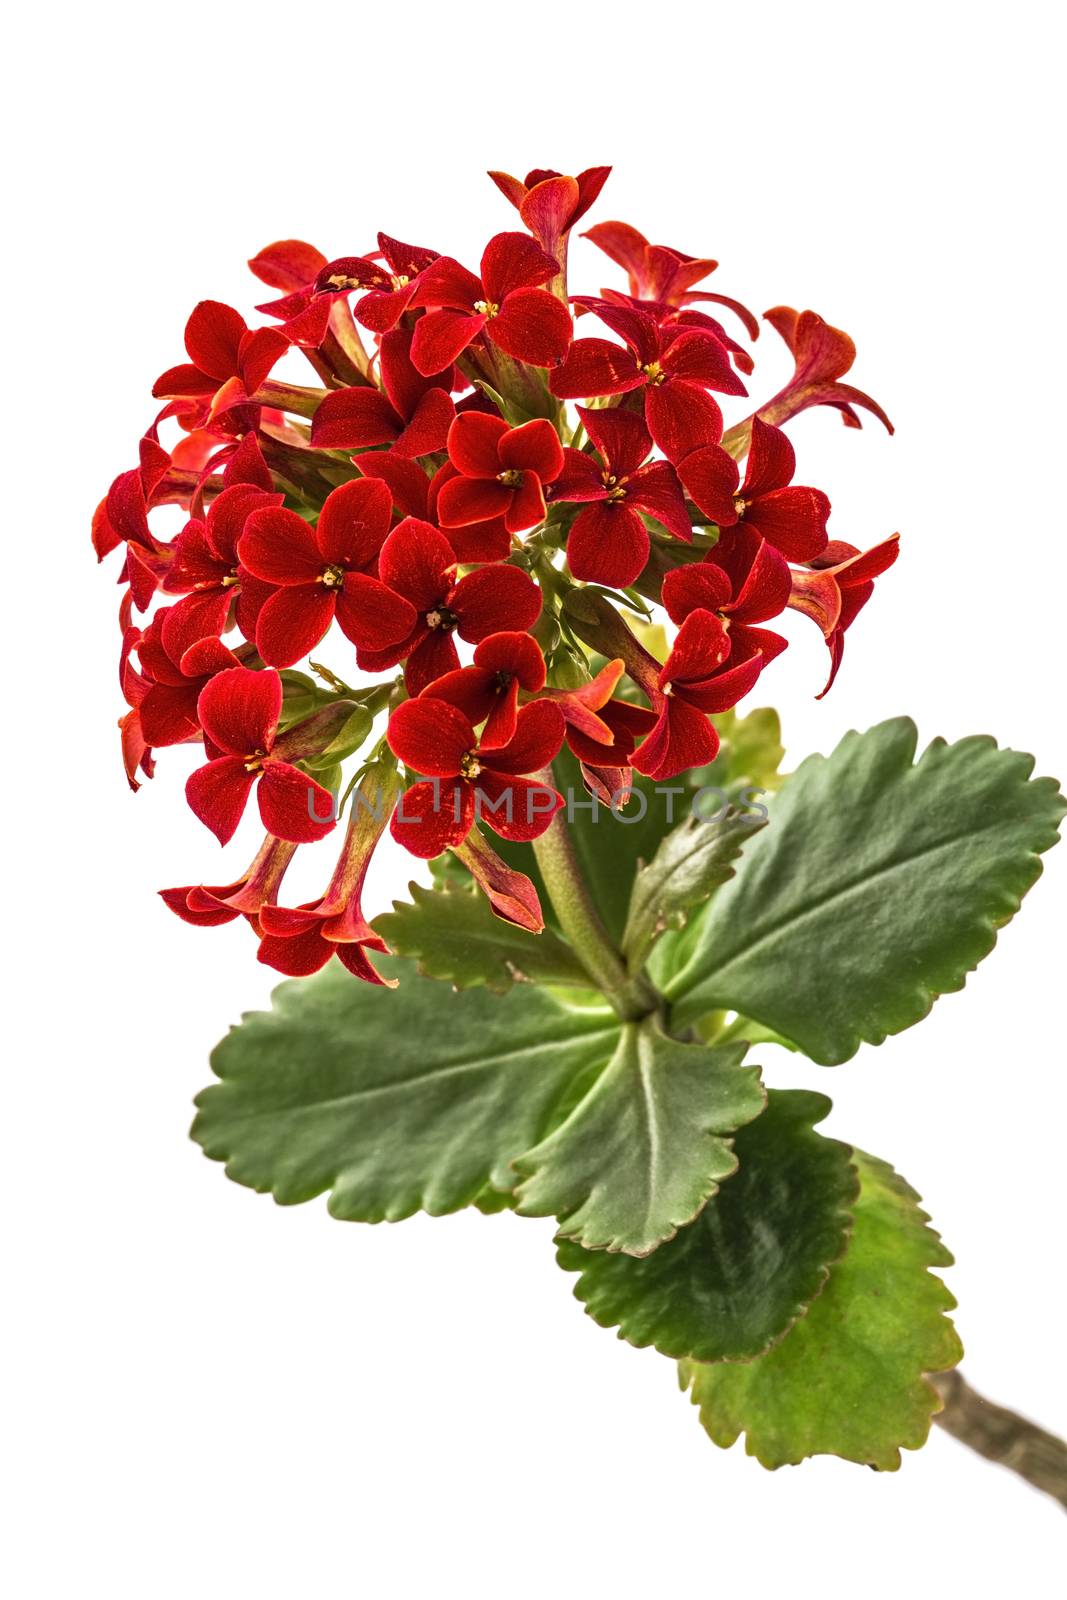 Flower Kalanchoe, tropical succulent, isolated on white backgrou by kostiuchenko